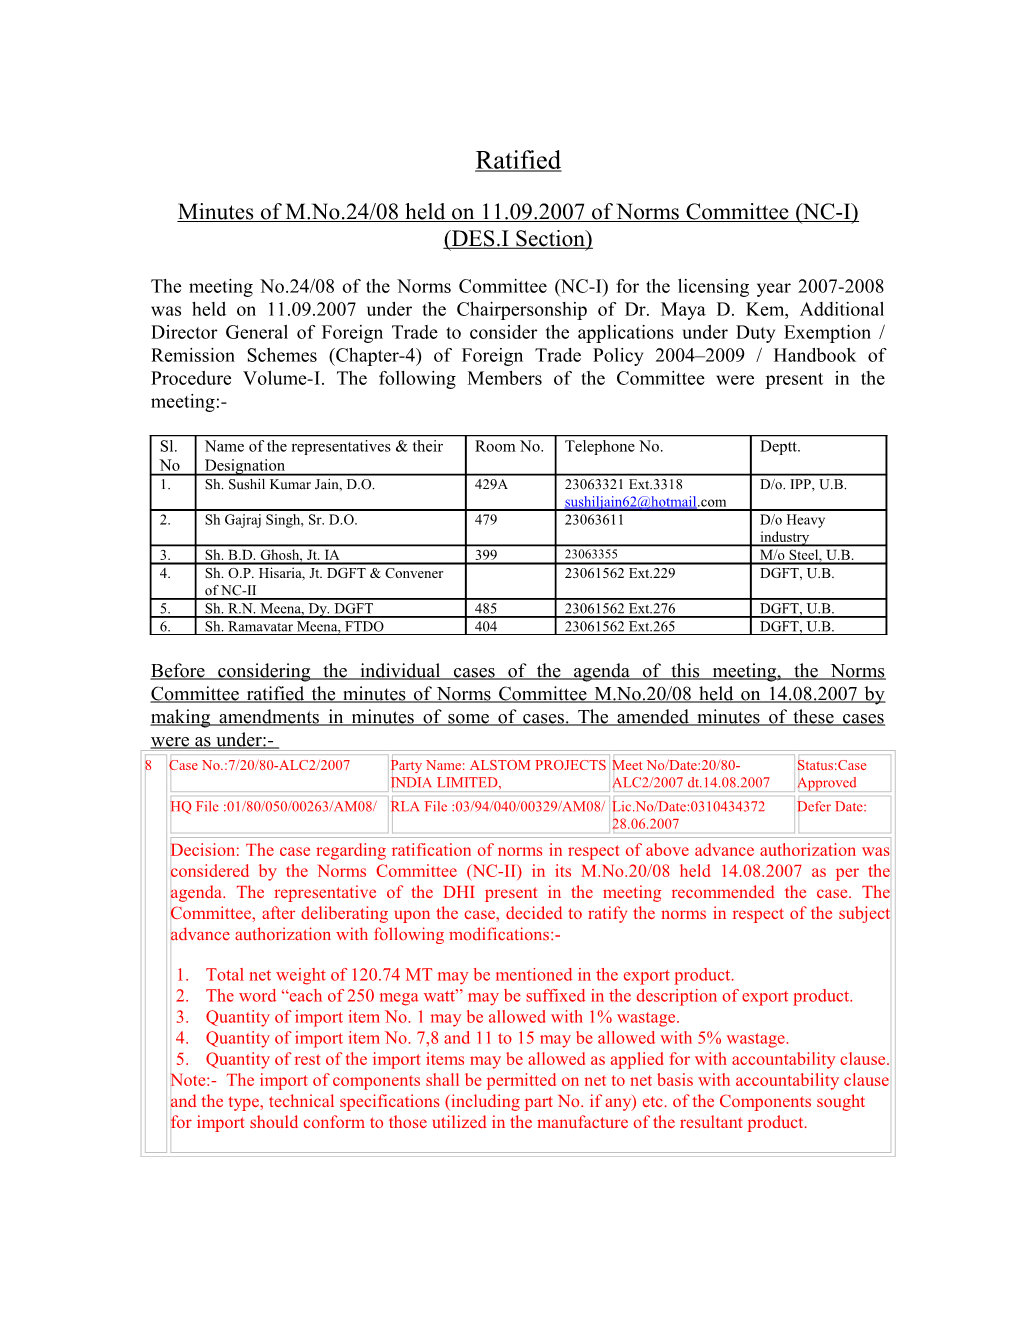 Minutes of M.No.24/08 Held on 11.09.2007 of Norms Committee (NC-I)